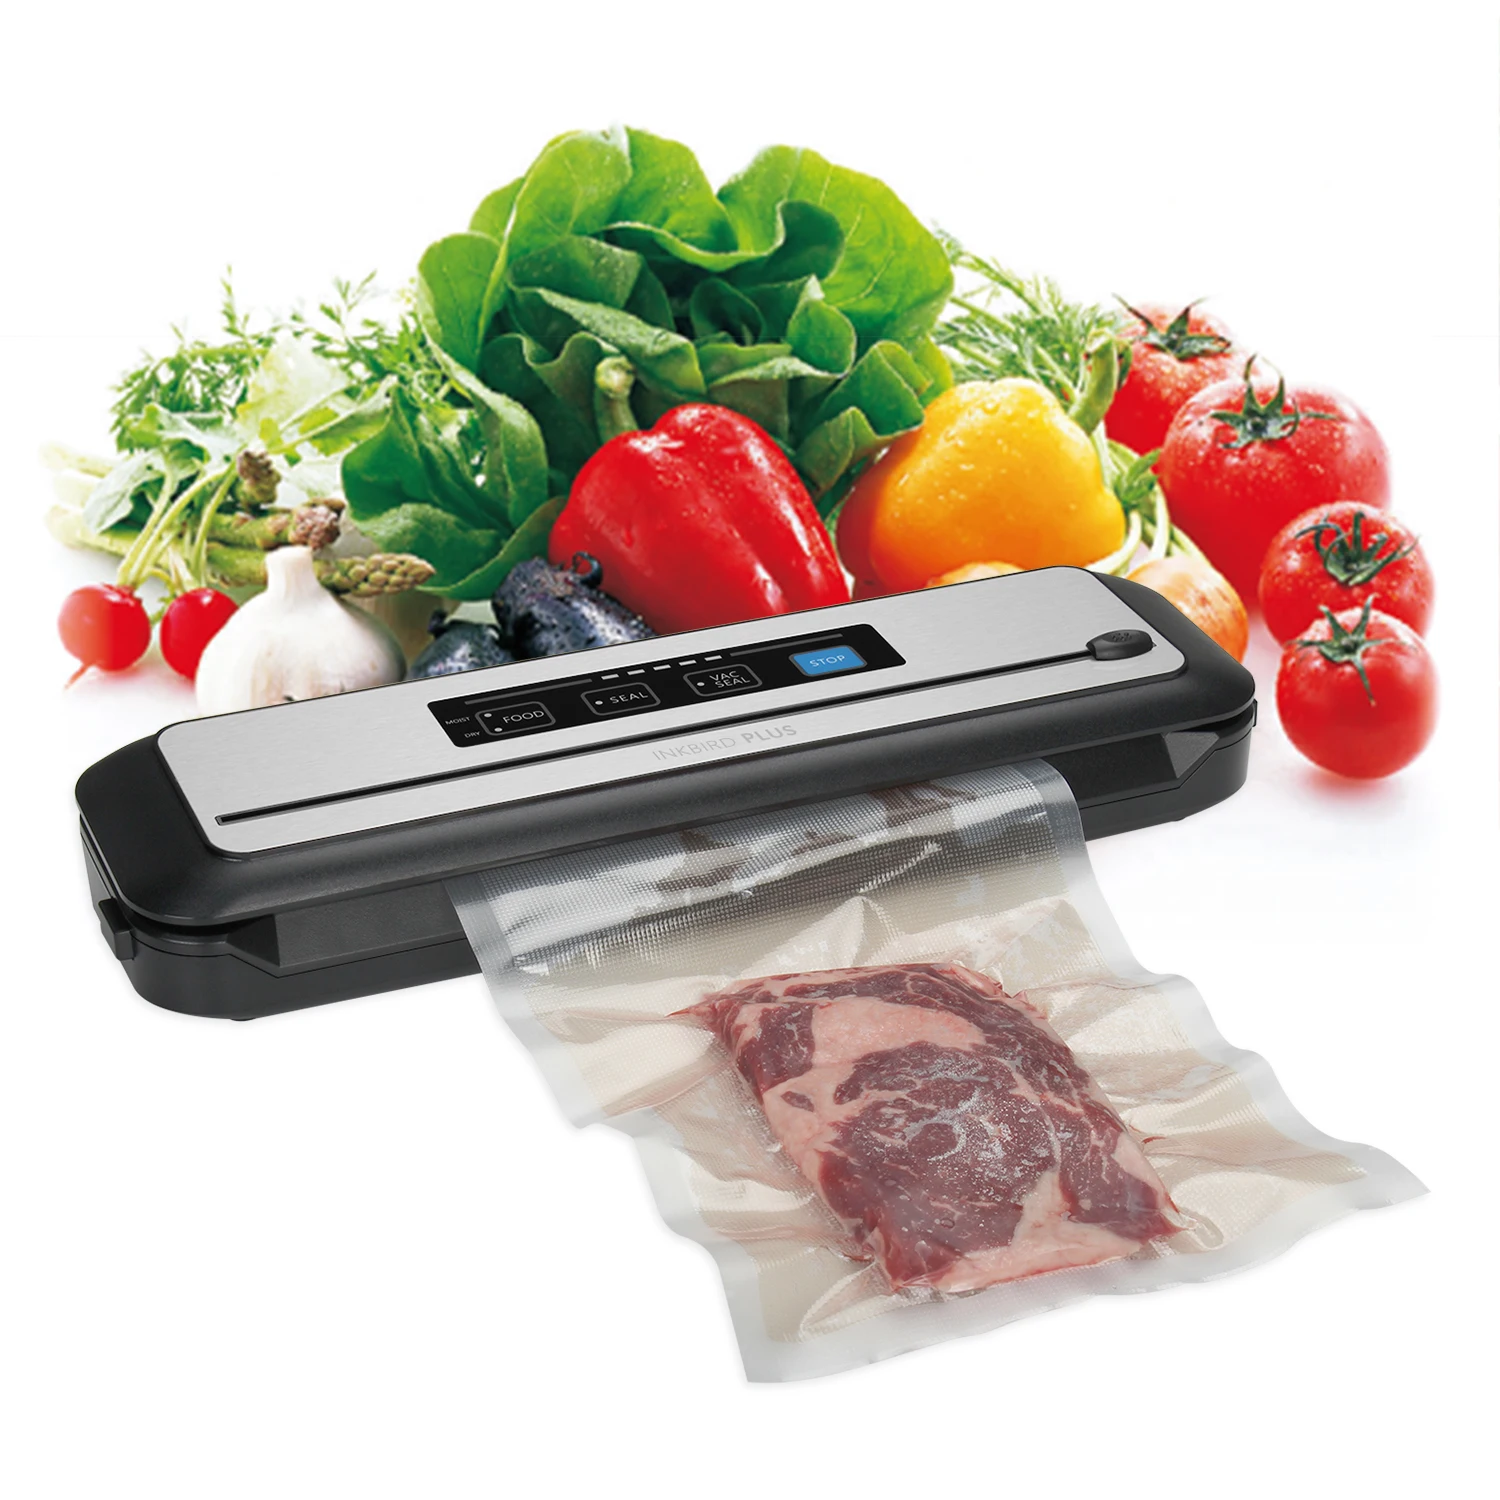 INKBIRD INK-VS01 Vacuum Sealer Best Automatic Sealing Machine for Food Preservation with Dry&Moist Modes Built-in Cutter biolomix vacuum sealer automatic food saver machine for food preservation dry